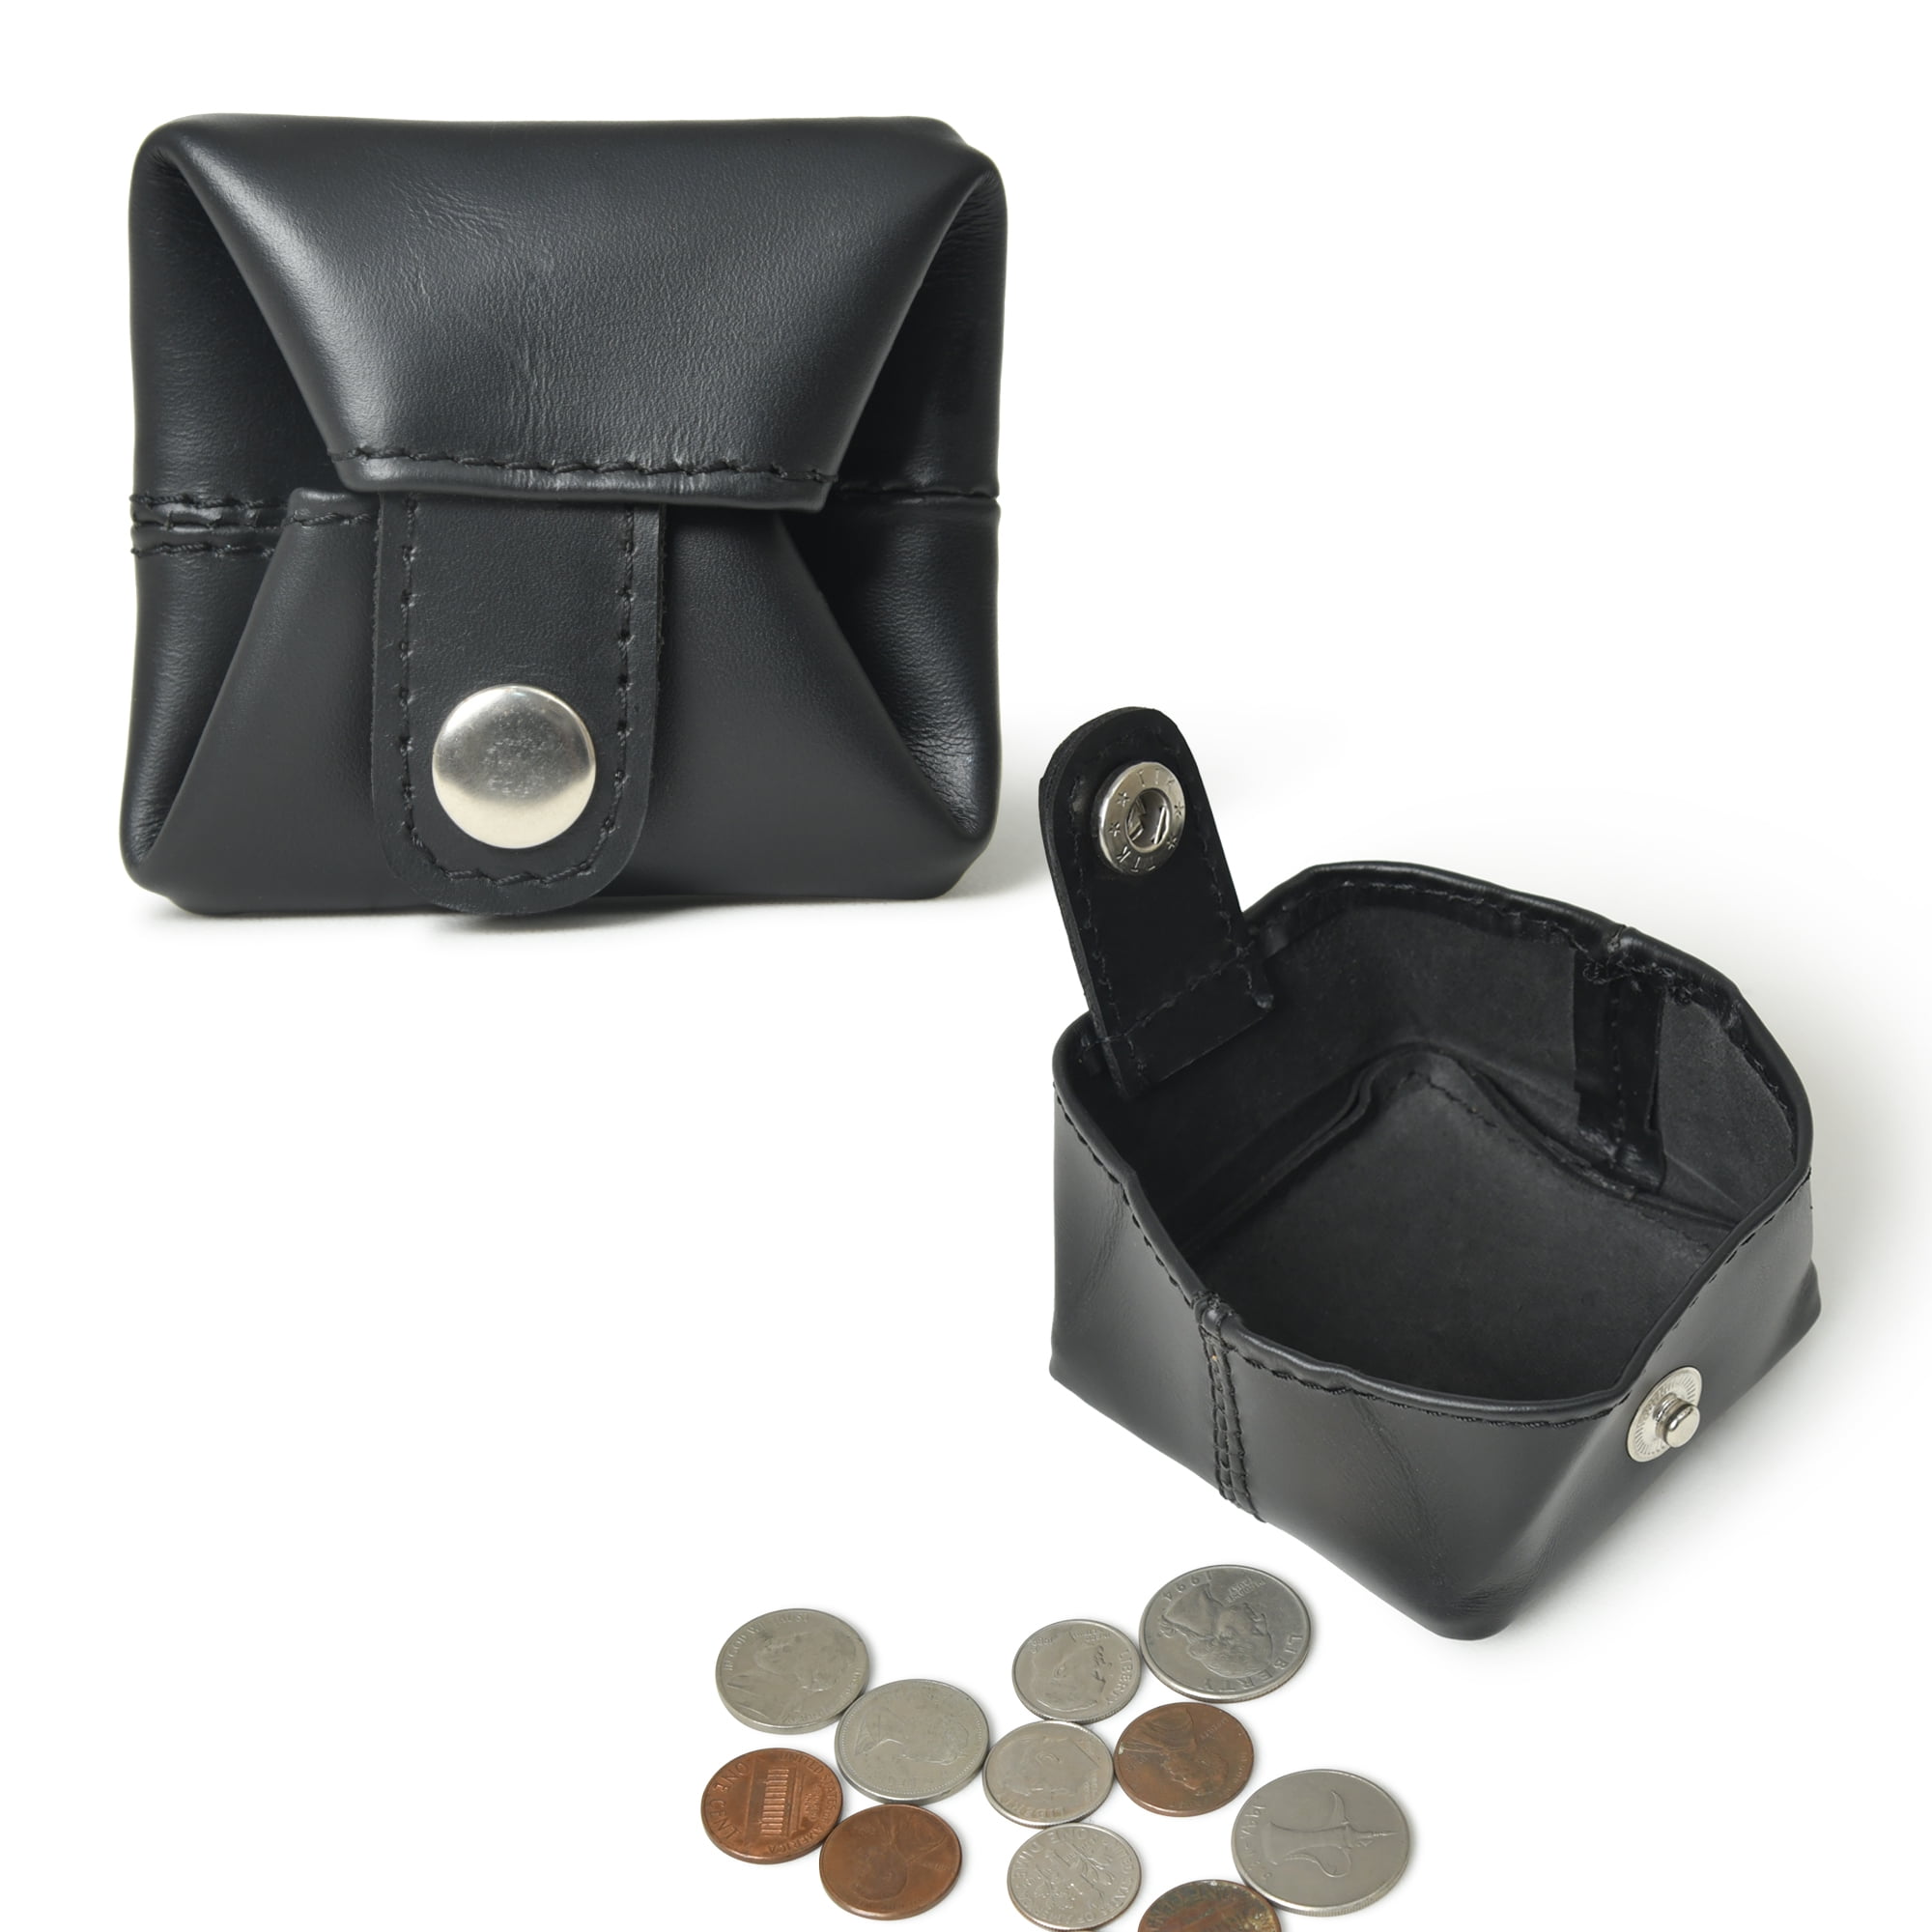 Handmade Small Genuine Leather Coin Purse for Men Women Lady Wholesale -  China Card Sleeves and Leather Purse price | Made-in-China.com